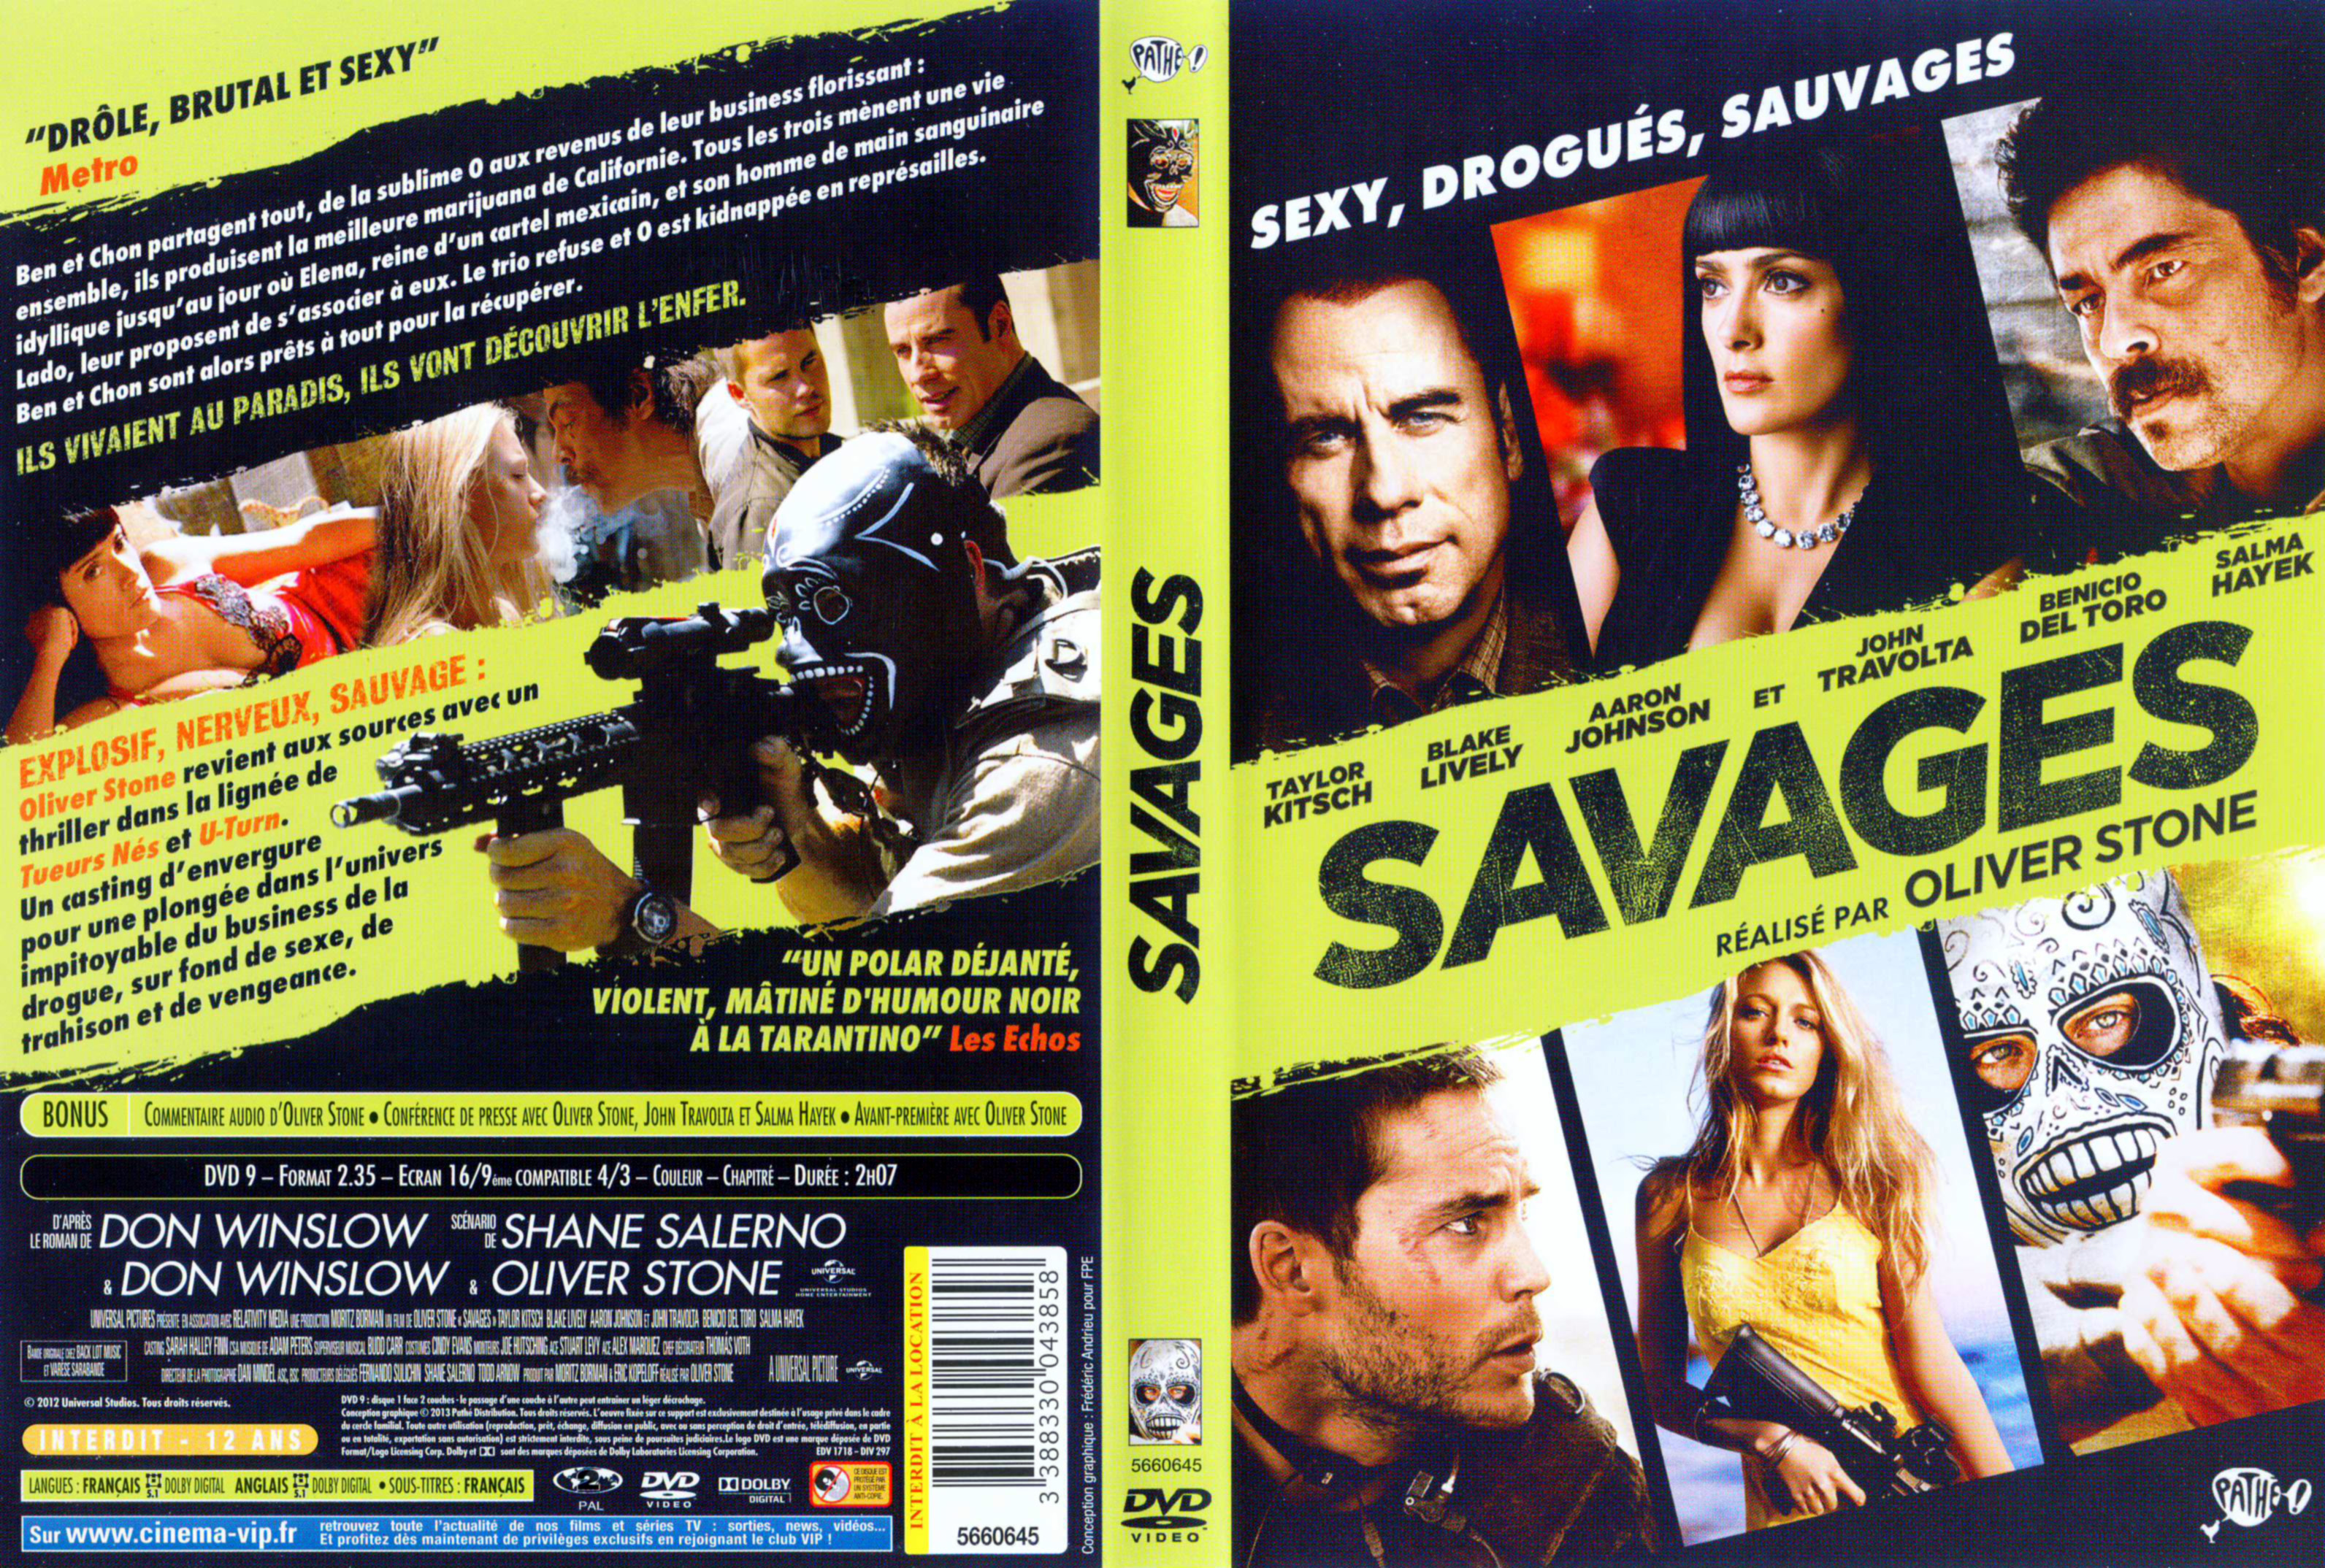 Jaquette DVD Savages